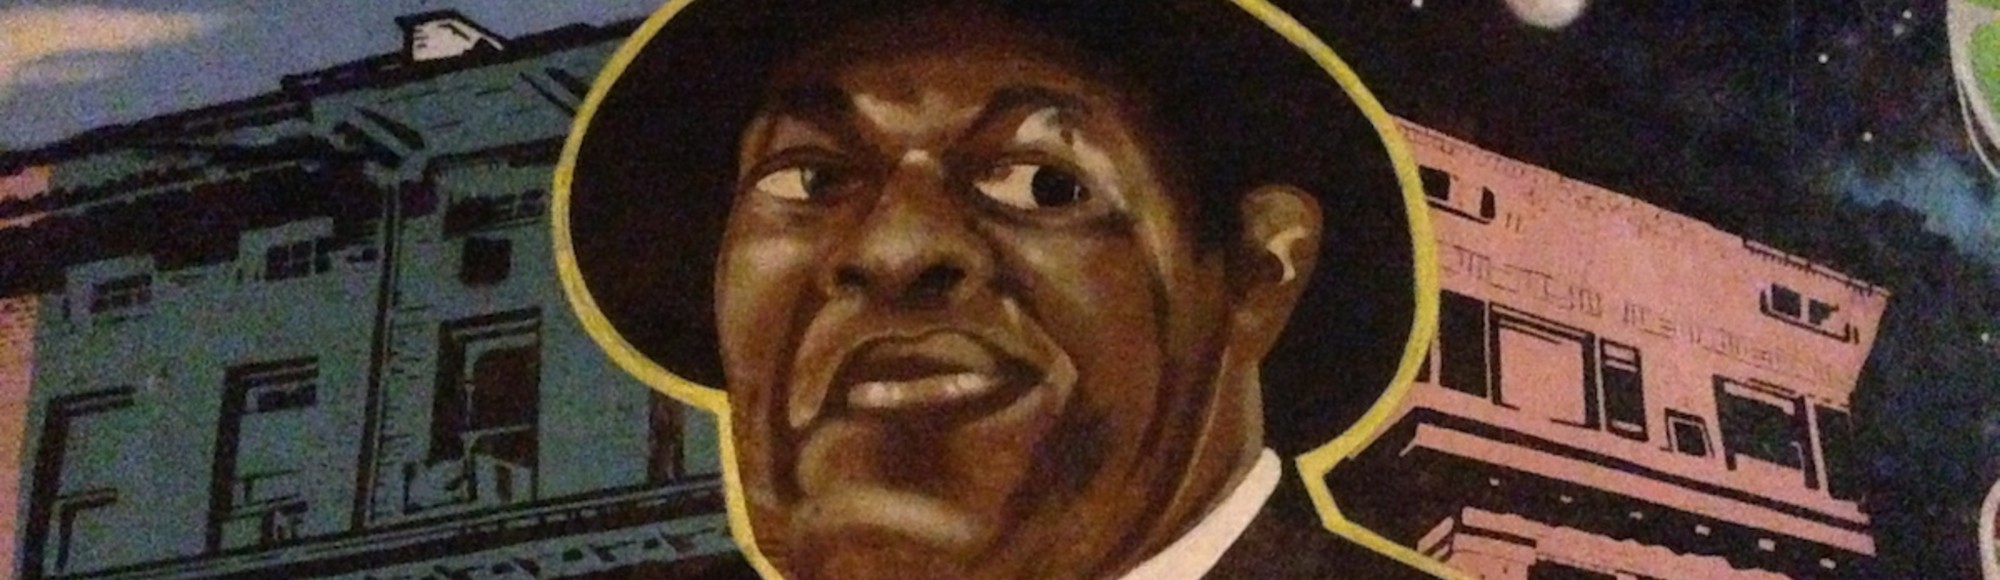 A new Marion Barry mural on